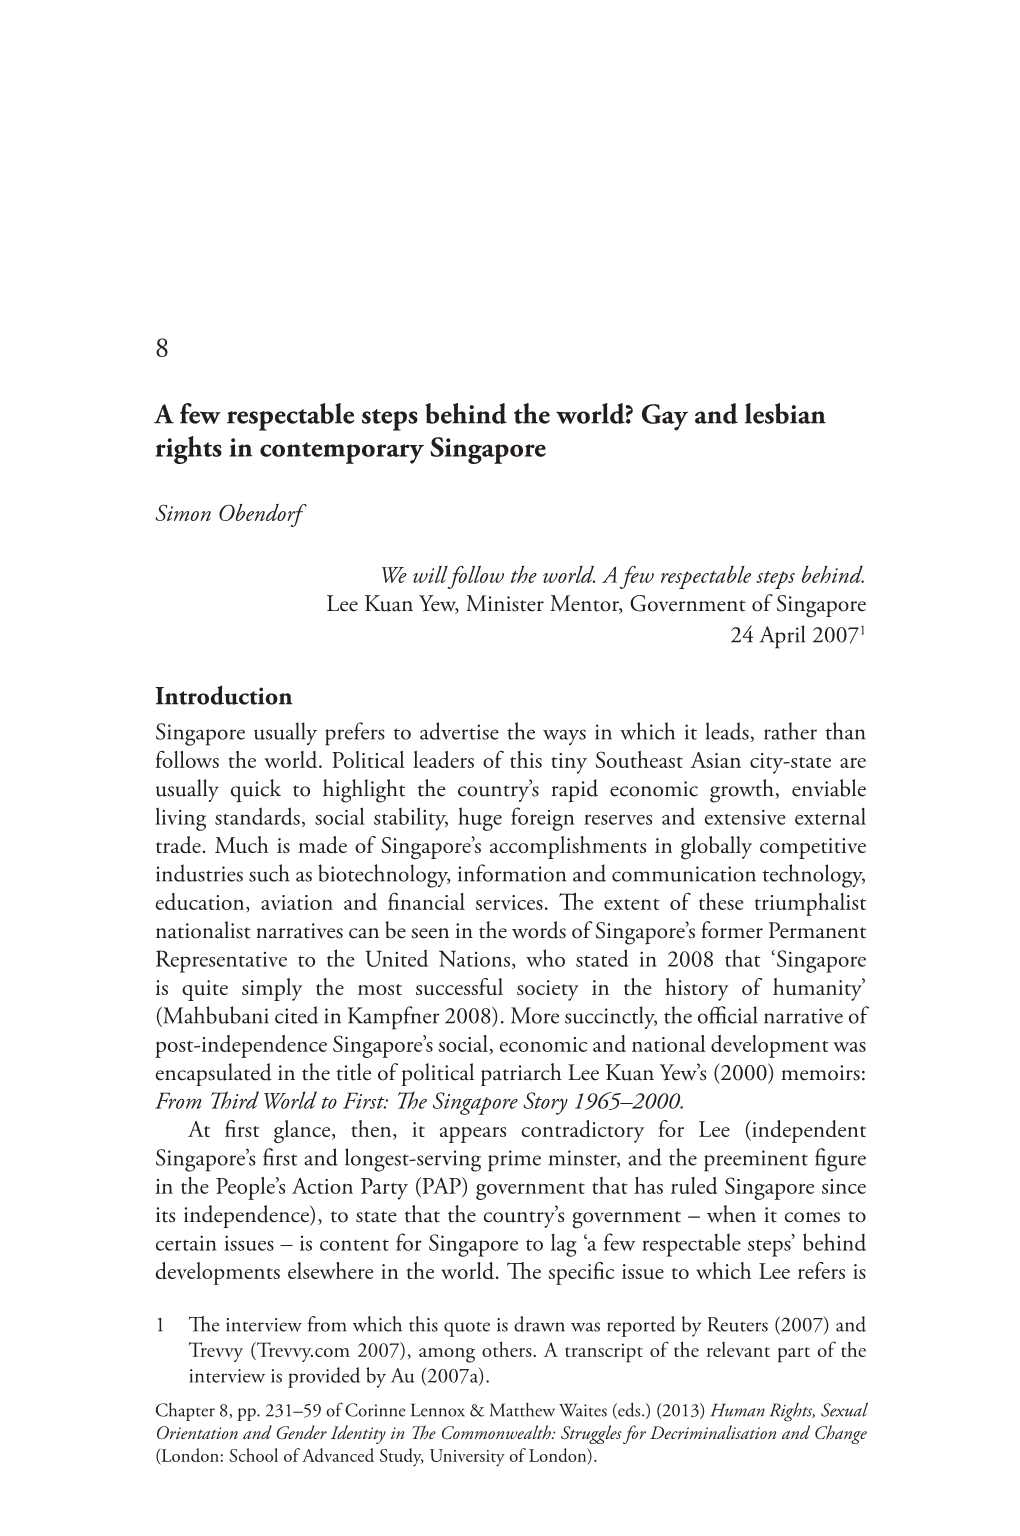 Gay and Lesbian Rights in Contemporary Singapore